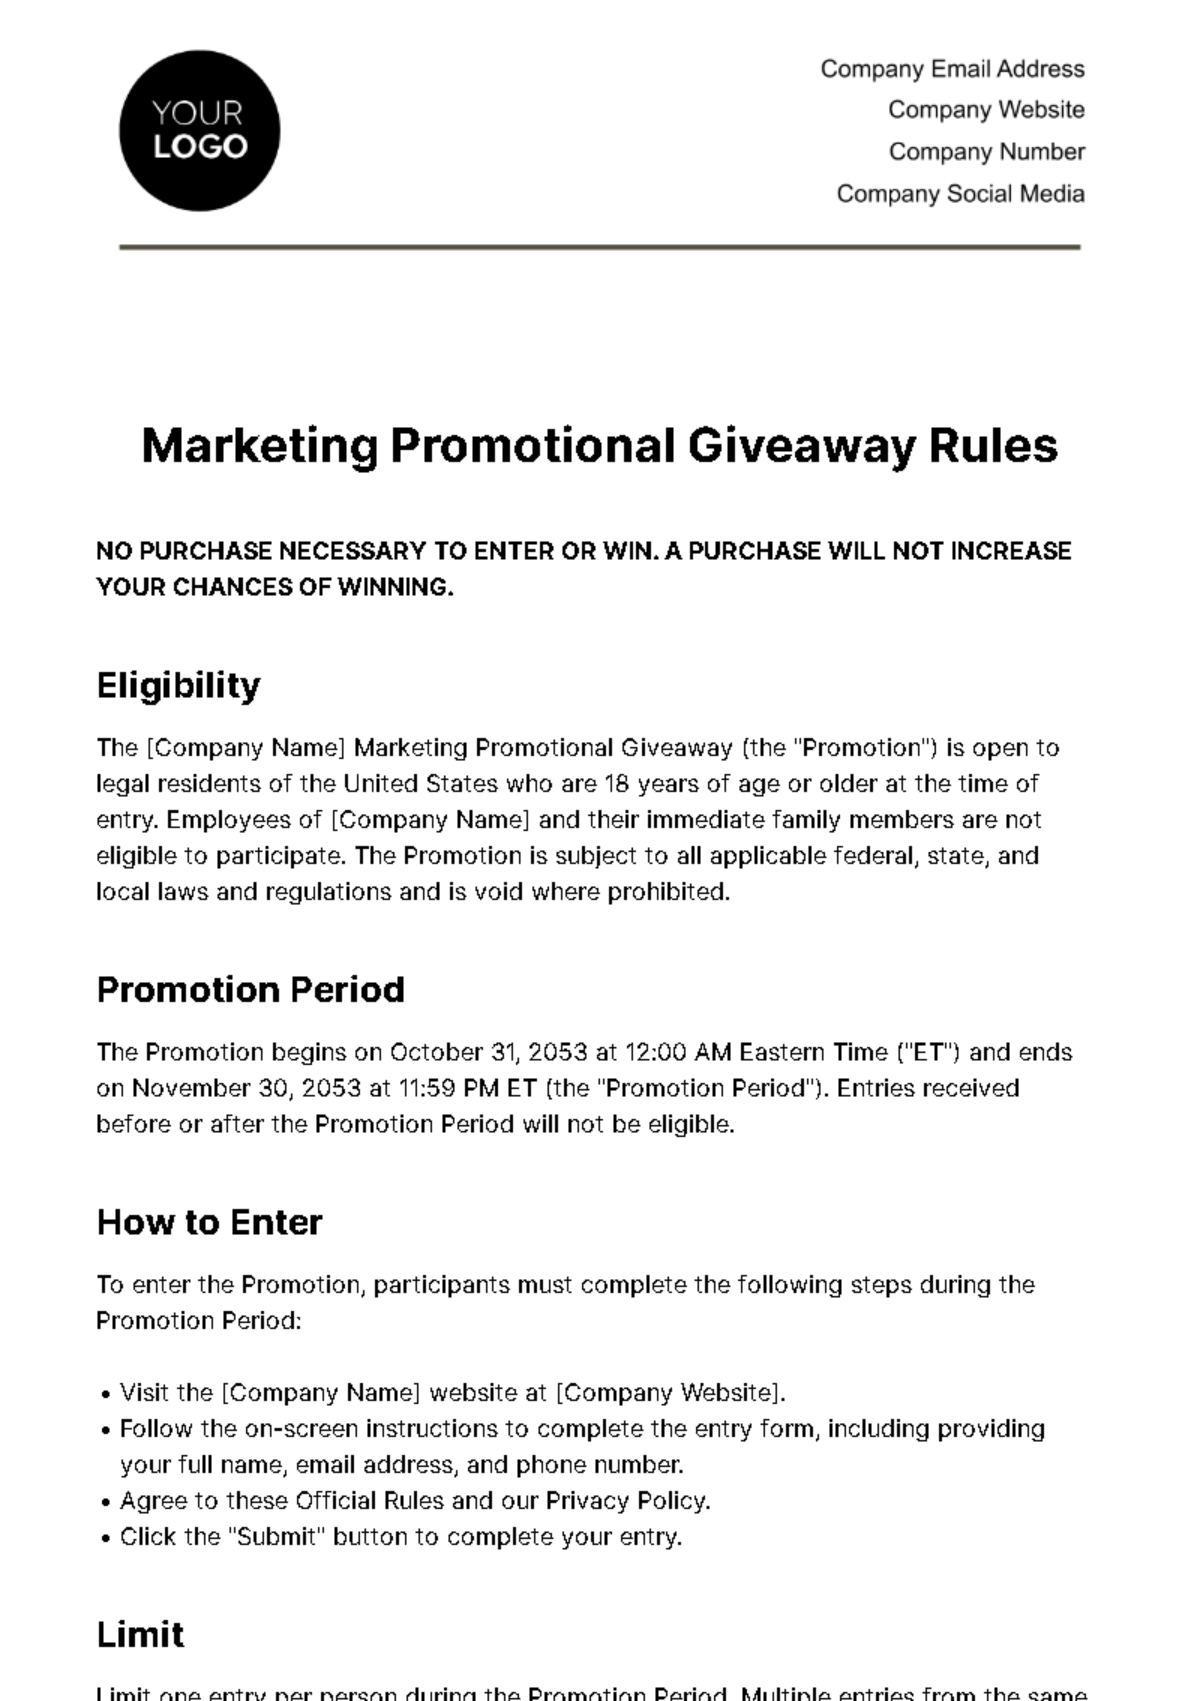 Marketing Promotional Giveaway Rules Template